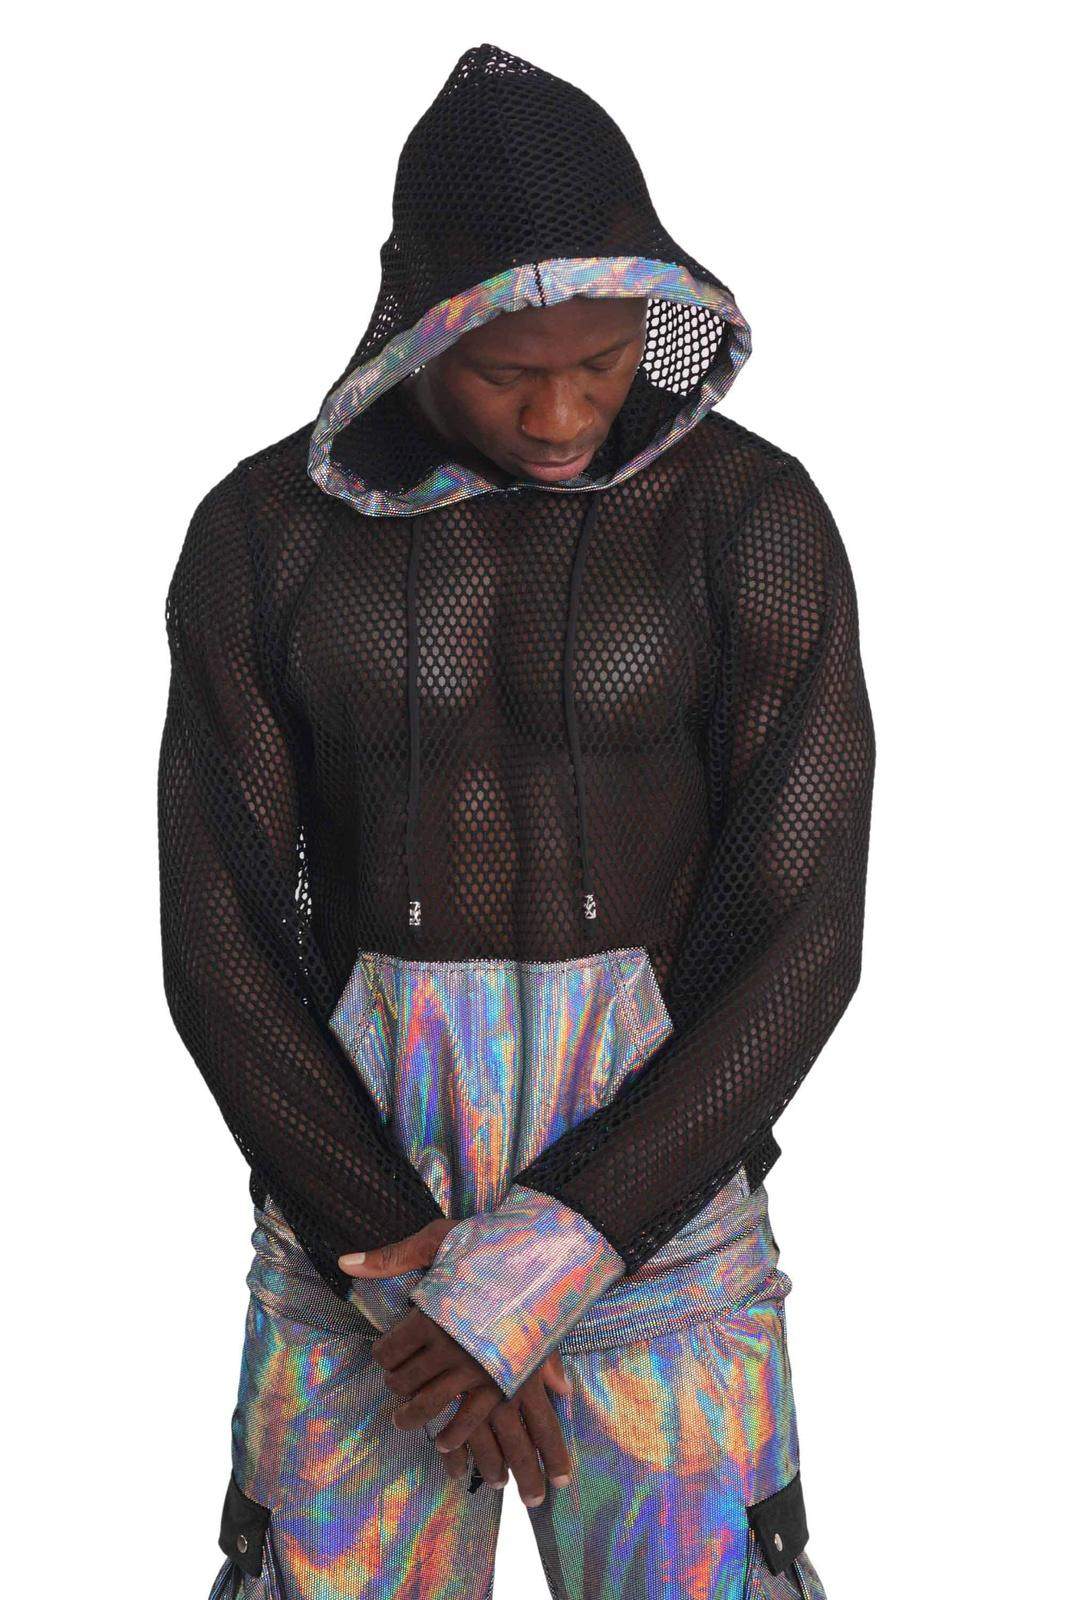 Mens Black and Silver Mesh Hoodie from Love Khaos.